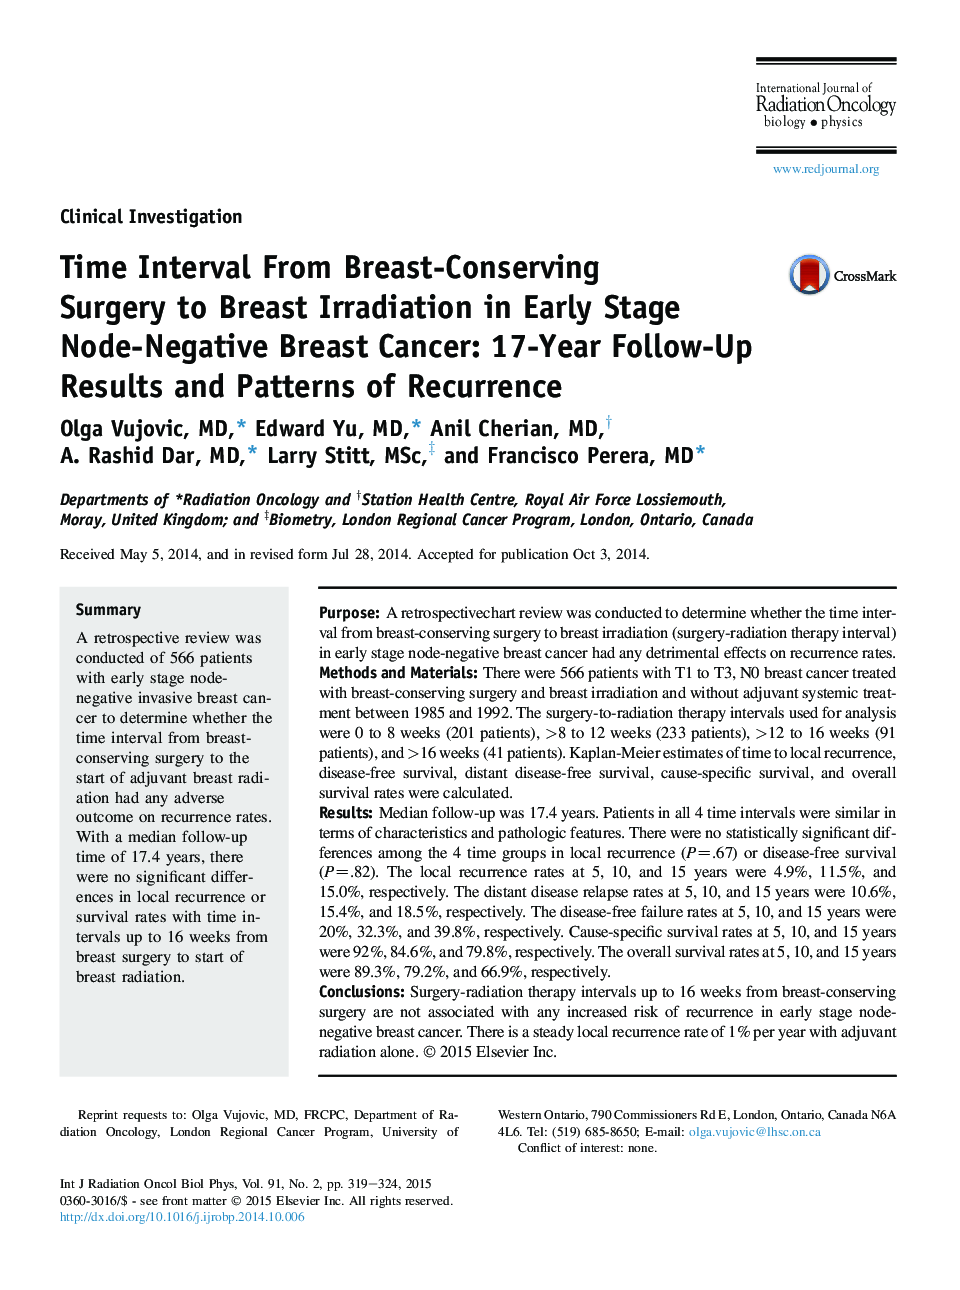 Time Interval From Breast-Conserving Surgery to Breast Irradiation in Early Stage Node-Negative Breast Cancer: 17-Year Follow-Up Results and Patterns of Recurrence